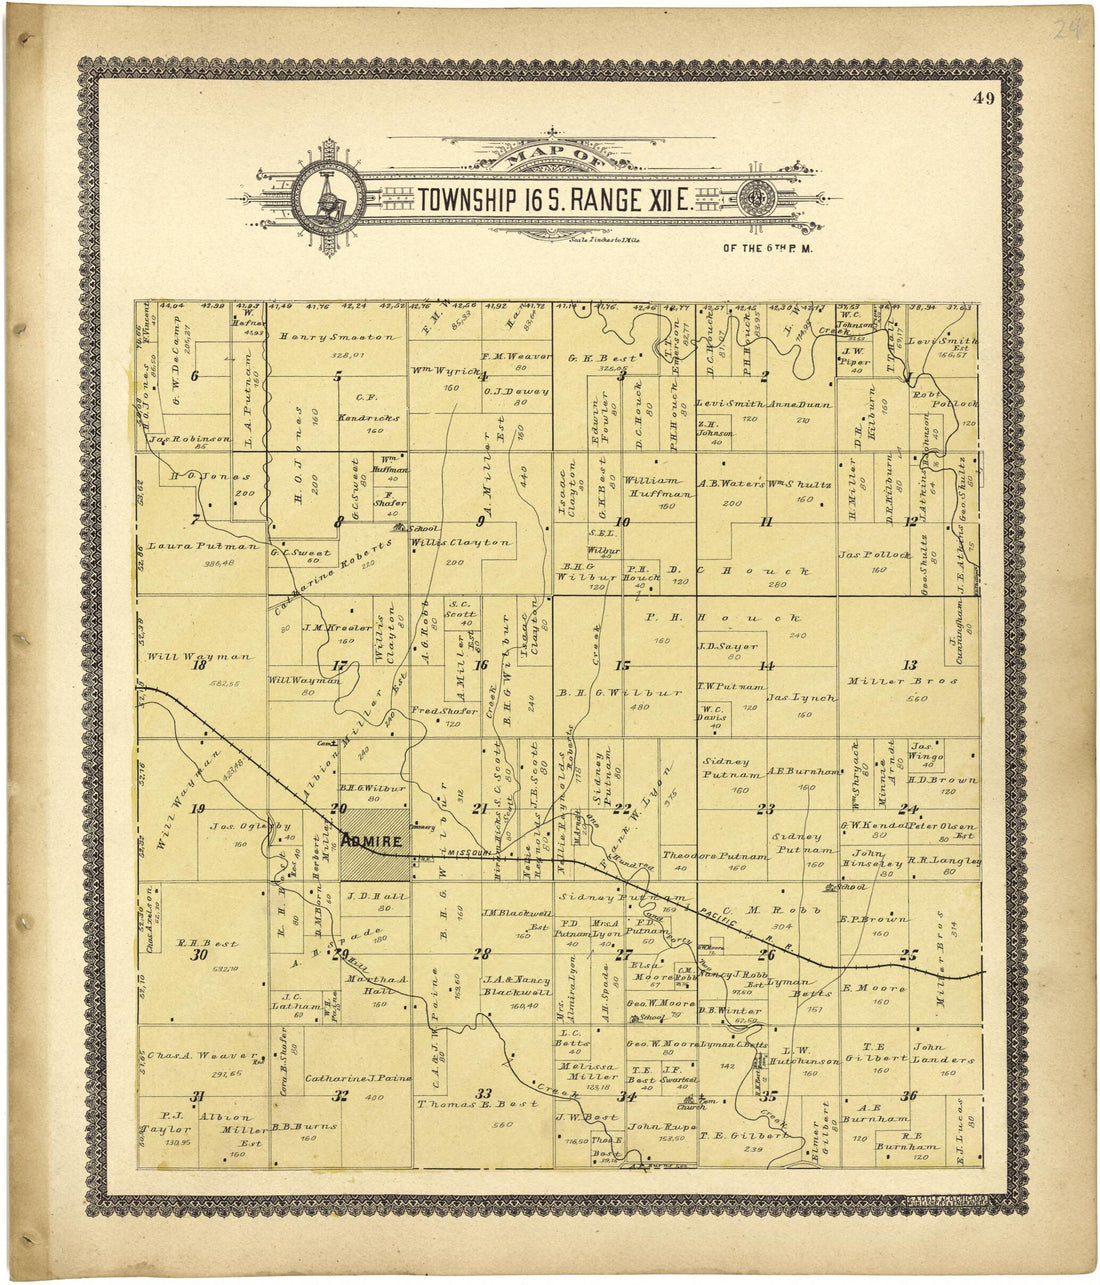 This old map of Map of Township 16 S. Range XII E. from Standard Atlas of Lyon County, Kansas from 1901 was created by  Geo. A. Ogle &amp; Co in 1901